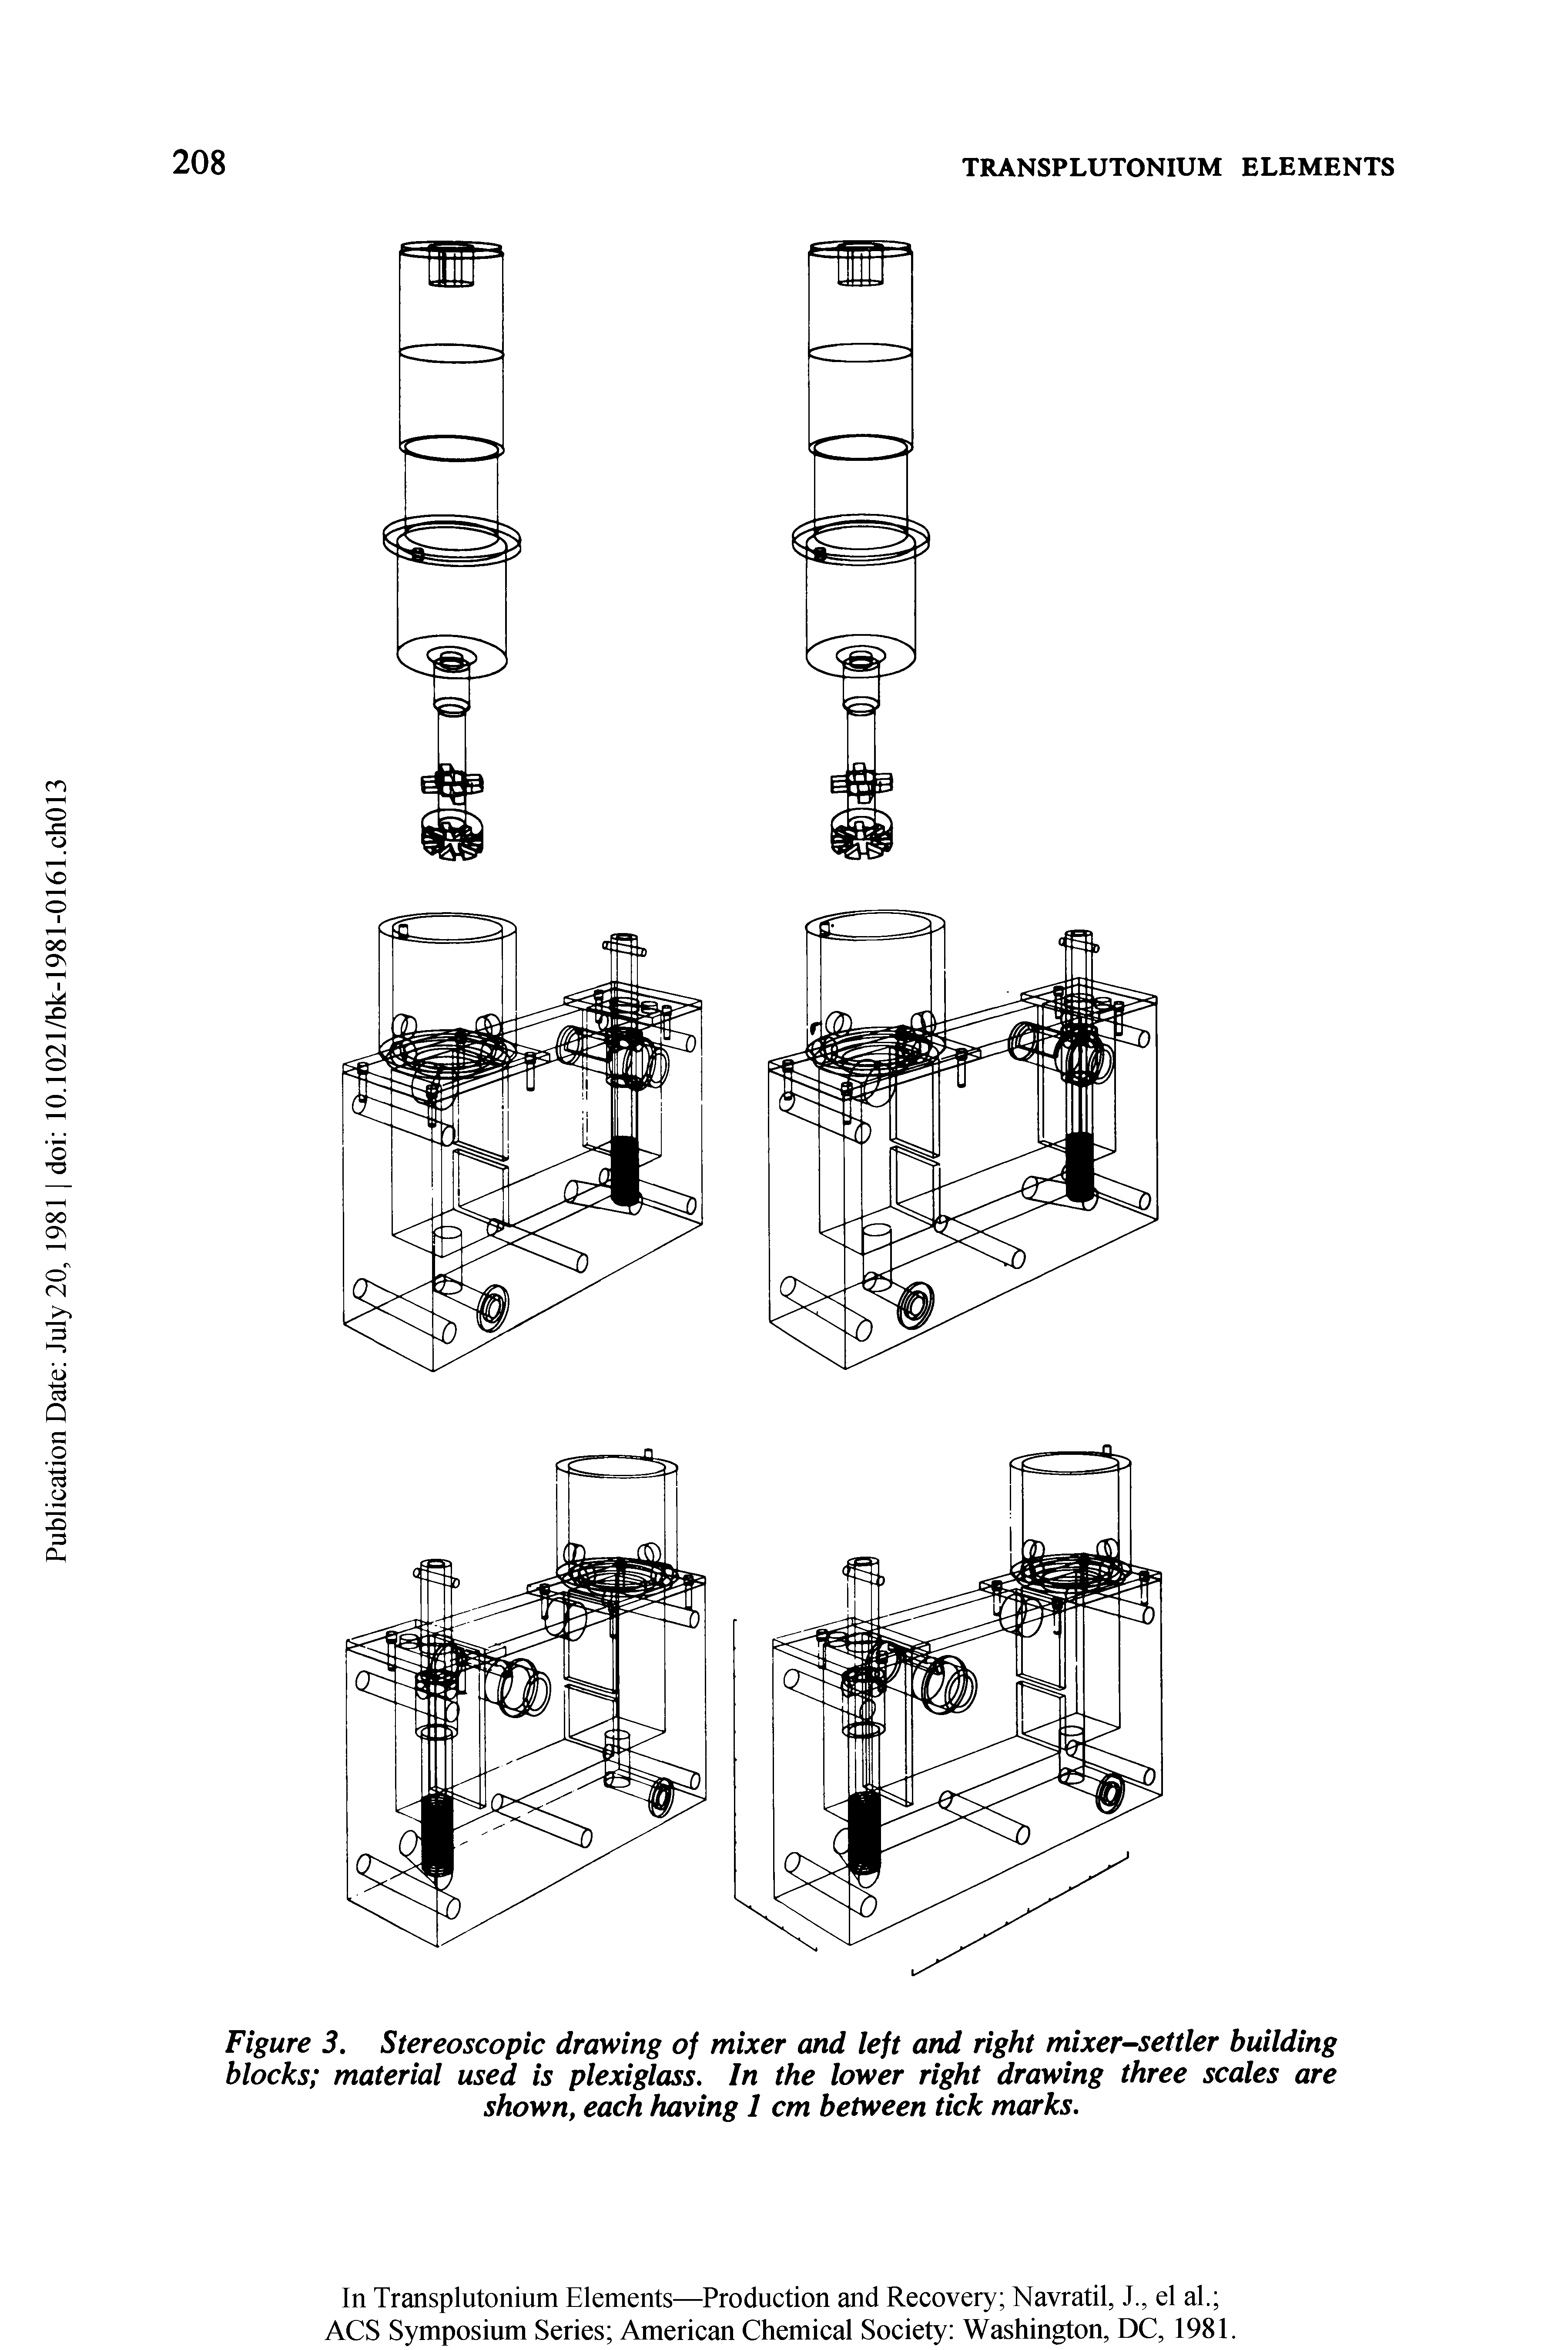 Figure 3. Stereoscopic drawing of mixer and left and right mixer-settler building blocks material used is plexiglass. In the lower right drawing three scales are shown, each having 1 cm between tick marks.